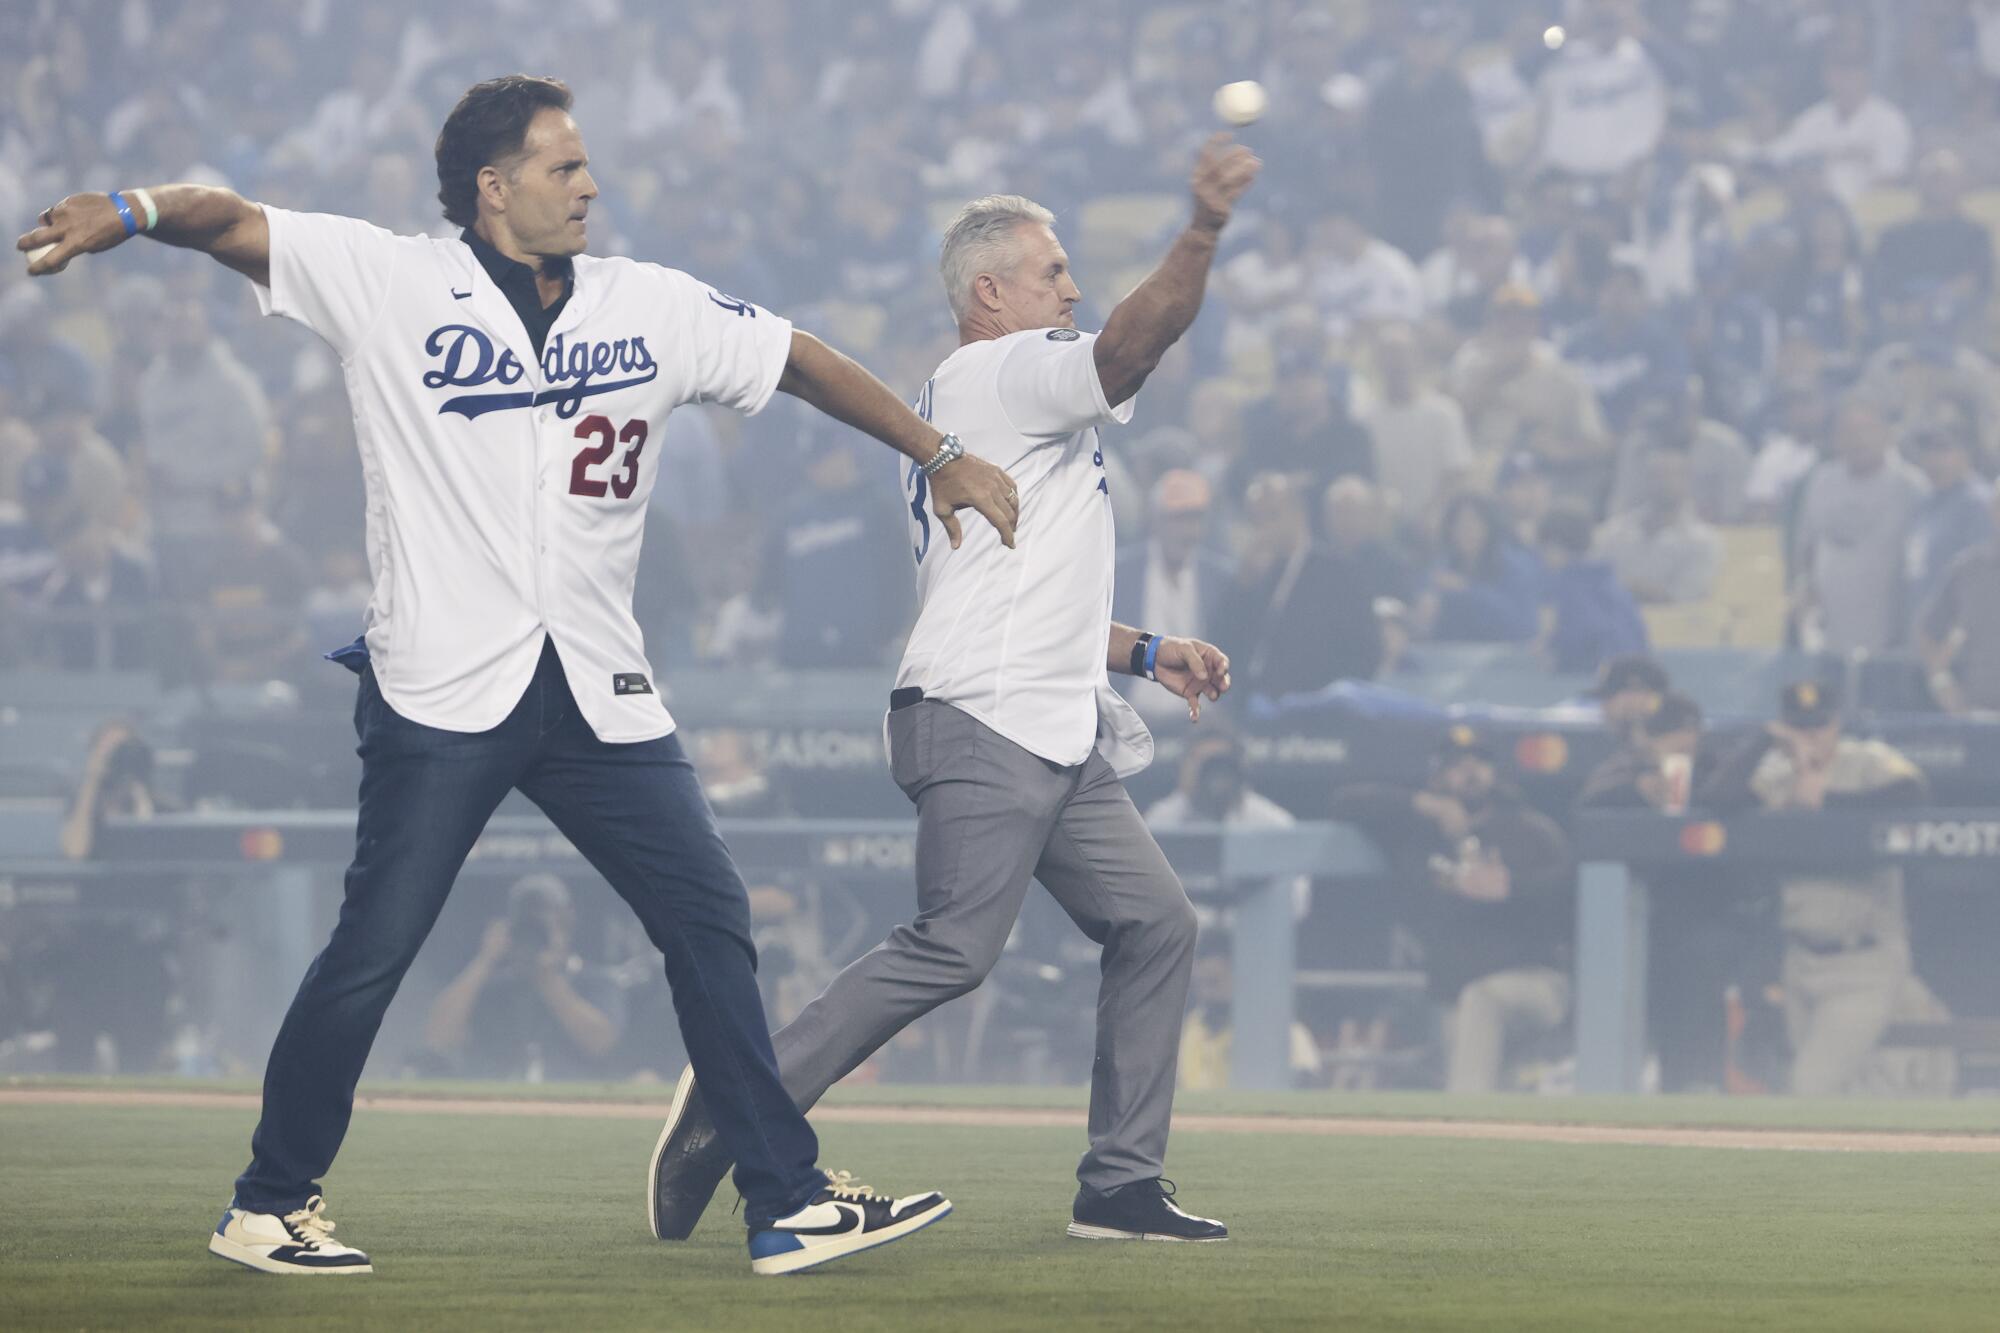 Eric Karros, left, and Steve Sax throw out to ceremonial first pitch before Game 1 of the 2022 NLDS at Dodger Stadium.